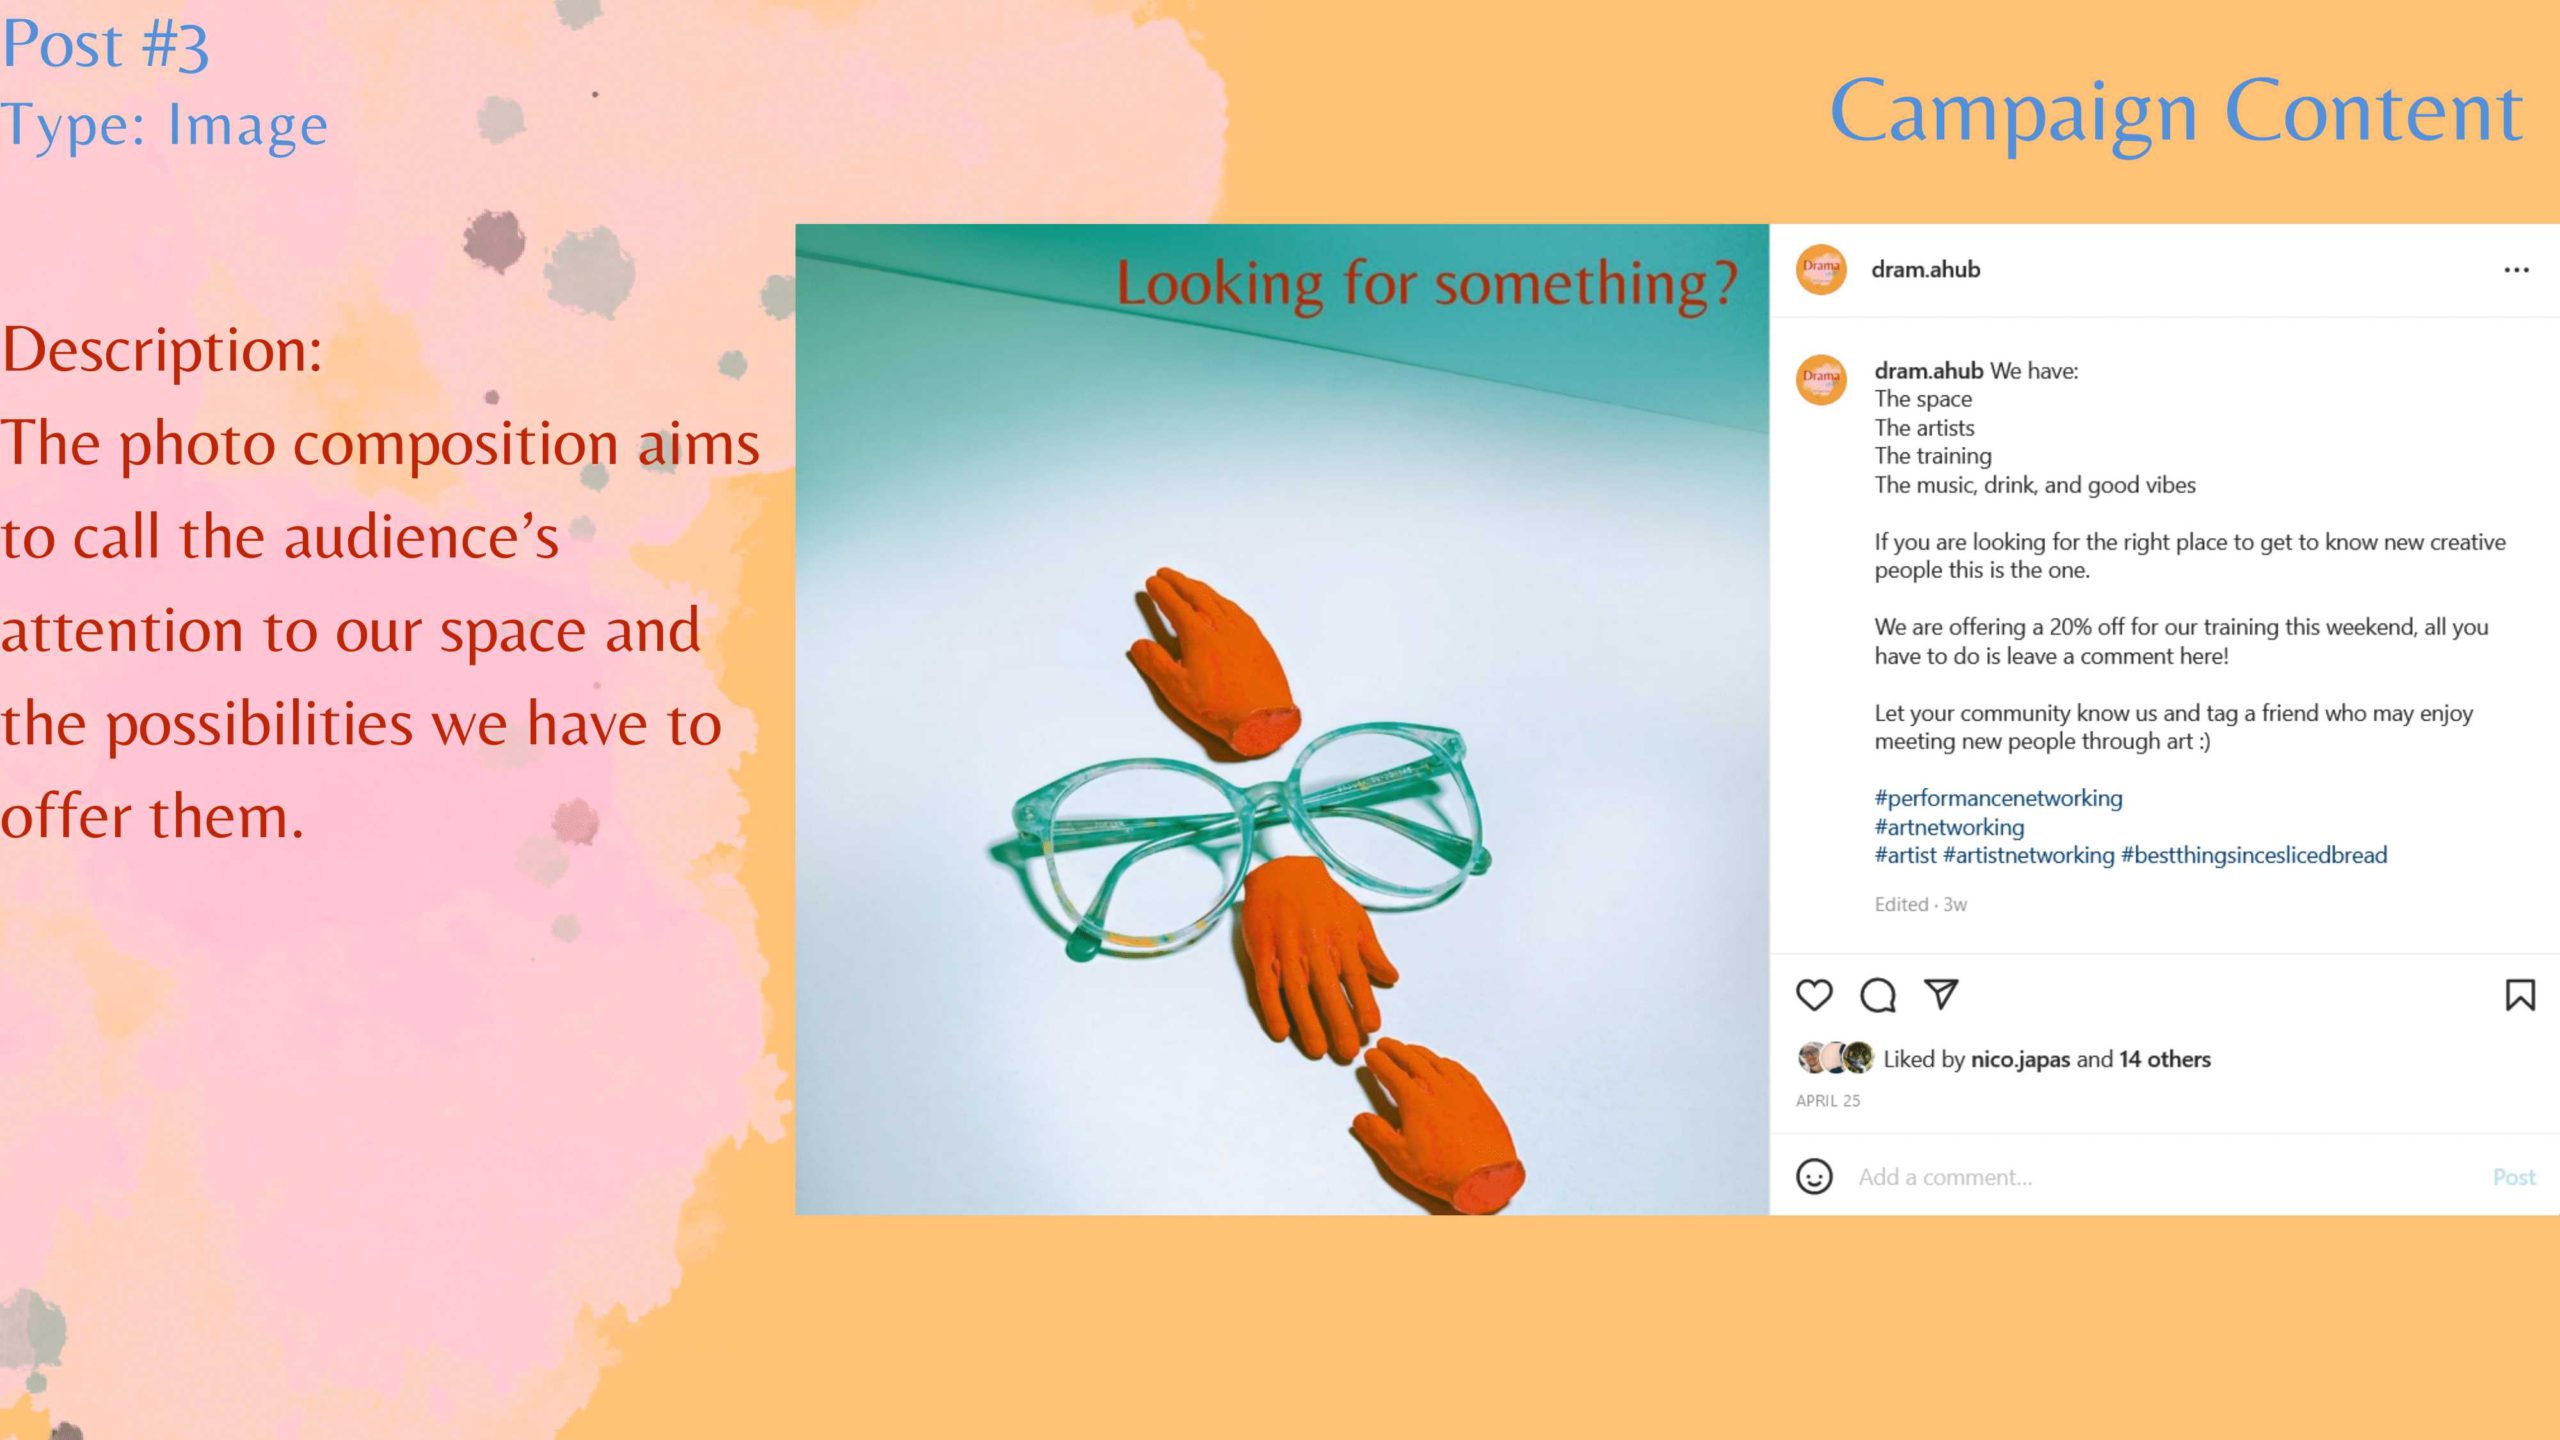 A portfolio project from the Intro to Digital Marketing Course at CareerFoundry, by Daniela Vacas